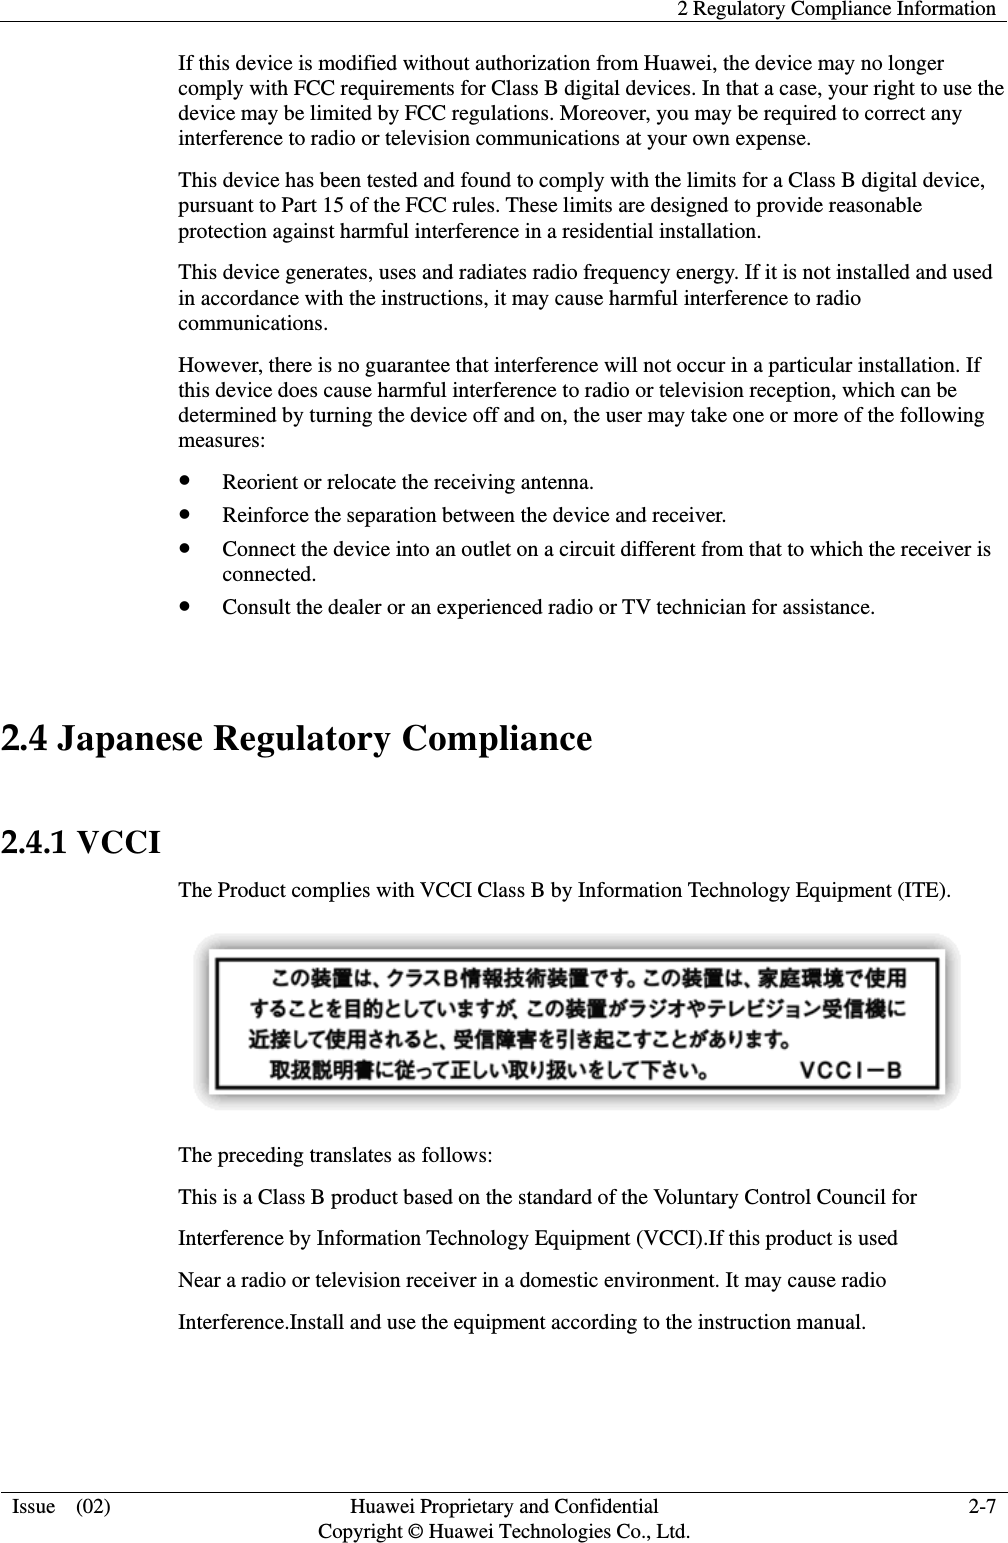    2 Regulatory Compliance Information  Issue  (02)  Huawei Proprietary and Confidential     Copyright © Huawei Technologies Co., Ltd. 2-7 If this device is modified without authorization from Huawei, the device may no longer comply with FCC requirements for Class B digital devices. In that a case, your right to use the device may be limited by FCC regulations. Moreover, you may be required to correct any interference to radio or television communications at your own expense. This device has been tested and found to comply with the limits for a Class B digital device, pursuant to Part 15 of the FCC rules. These limits are designed to provide reasonable protection against harmful interference in a residential installation. This device generates, uses and radiates radio frequency energy. If it is not installed and used in accordance with the instructions, it may cause harmful interference to radio communications. However, there is no guarantee that interference will not occur in a particular installation. If this device does cause harmful interference to radio or television reception, which can be determined by turning the device off and on, the user may take one or more of the following measures: z Reorient or relocate the receiving antenna. z Reinforce the separation between the device and receiver. z Connect the device into an outlet on a circuit different from that to which the receiver is connected. z Consult the dealer or an experienced radio or TV technician for assistance.  2.4 Japanese Regulatory Compliance  2.4.1 VCCI The Product complies with VCCI Class B by Information Technology Equipment (ITE).  The preceding translates as follows: This is a Class B product based on the standard of the Voluntary Control Council for Interference by Information Technology Equipment (VCCI).If this product is used Near a radio or television receiver in a domestic environment. It may cause radio Interference.Install and use the equipment according to the instruction manual.   